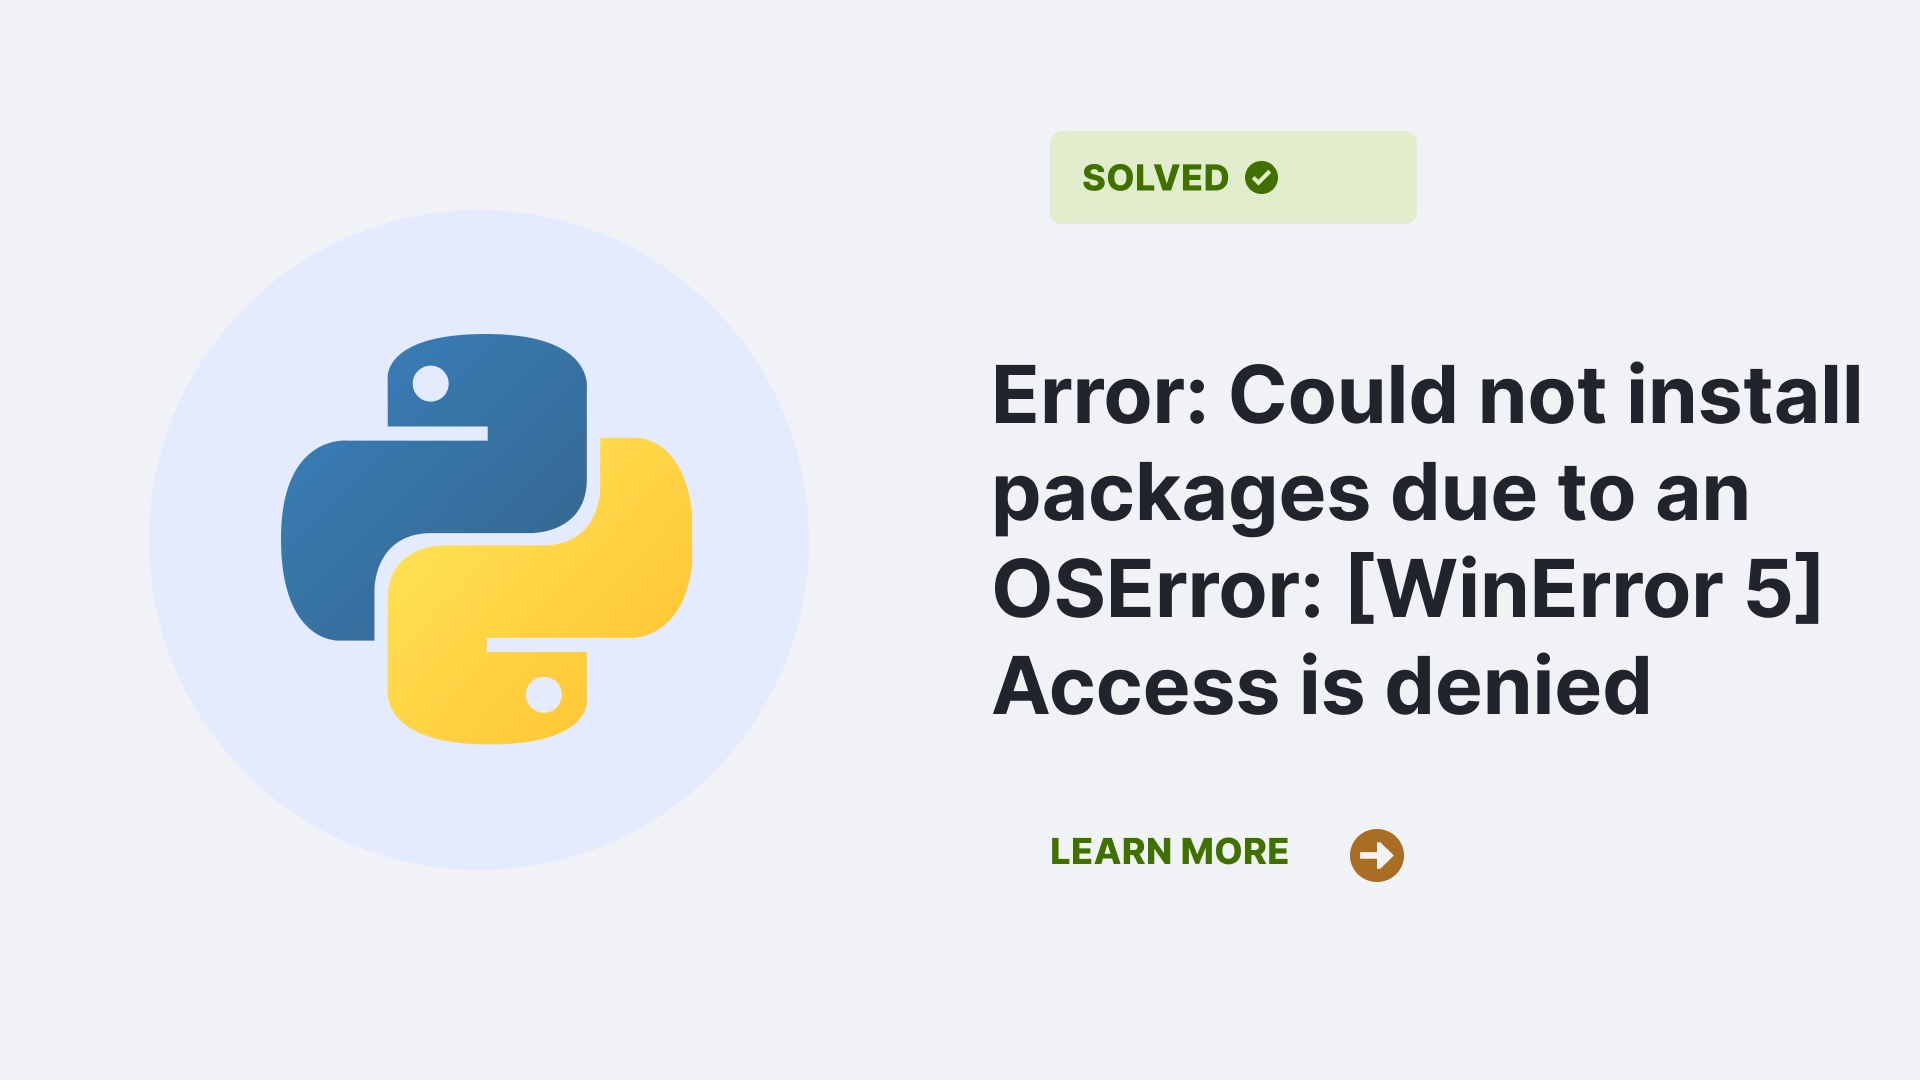 Error: Could not install packages due to an OSError: [WinError 5] Access is denied